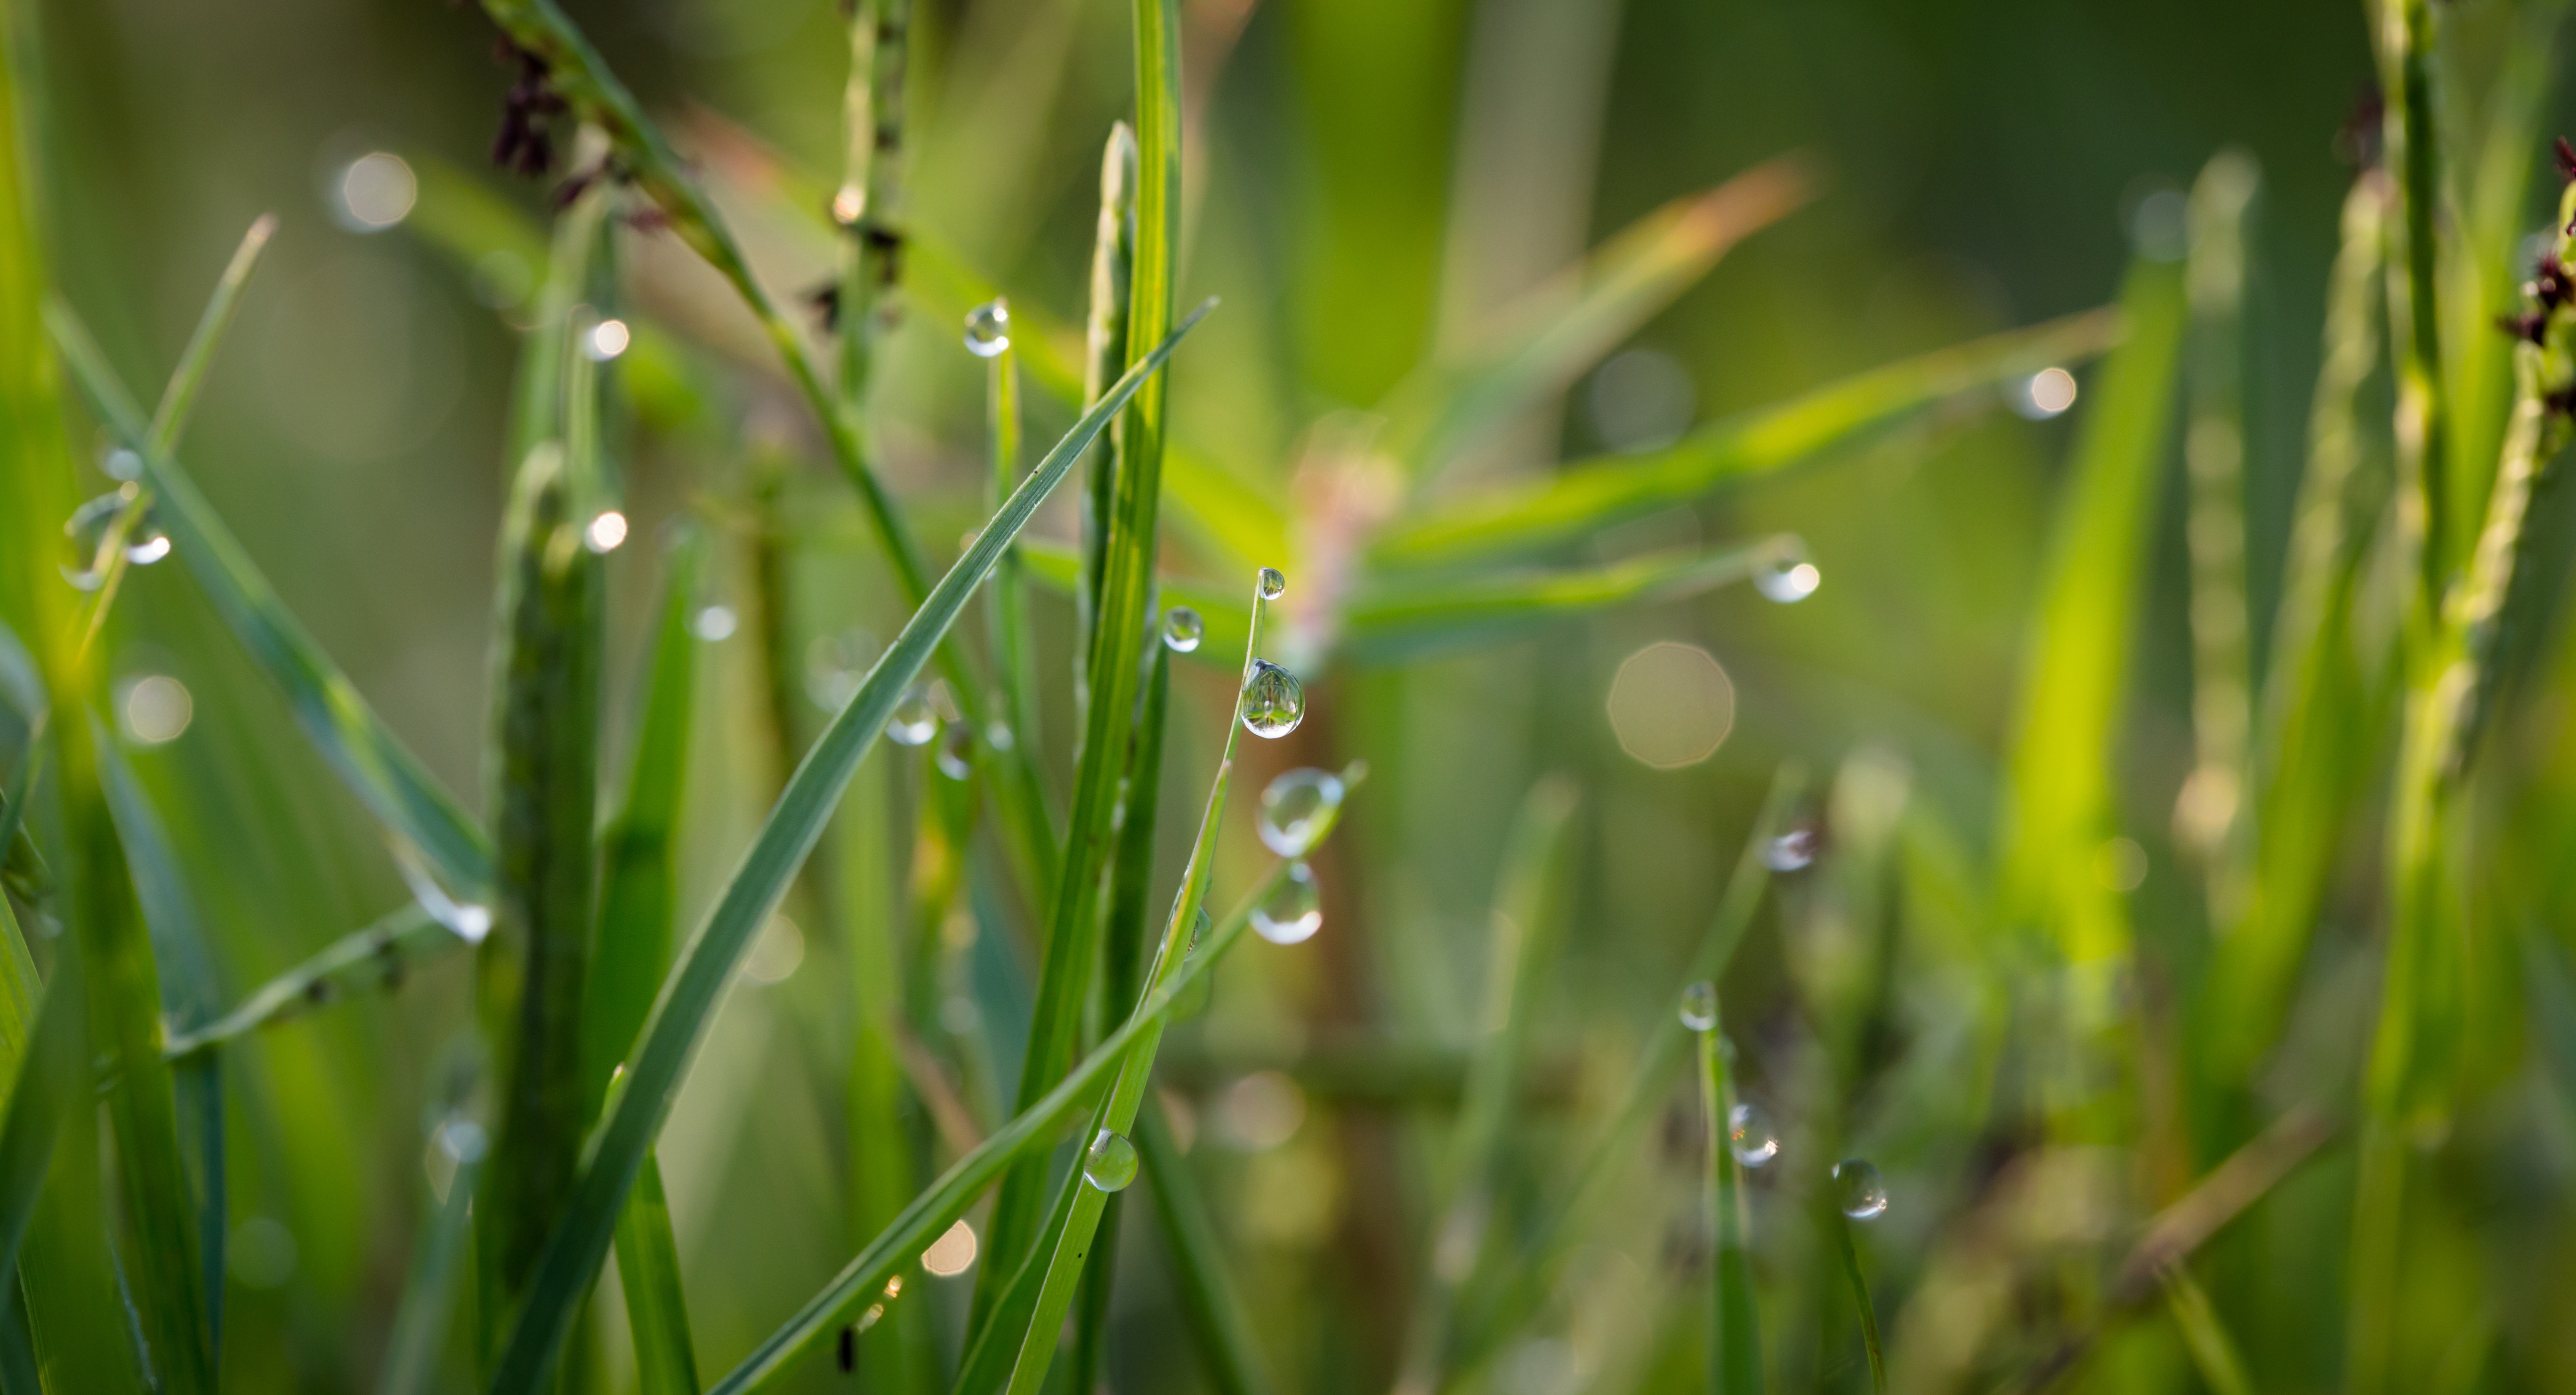 Grass With Dew Drops during Daytime · Free Stock Photo